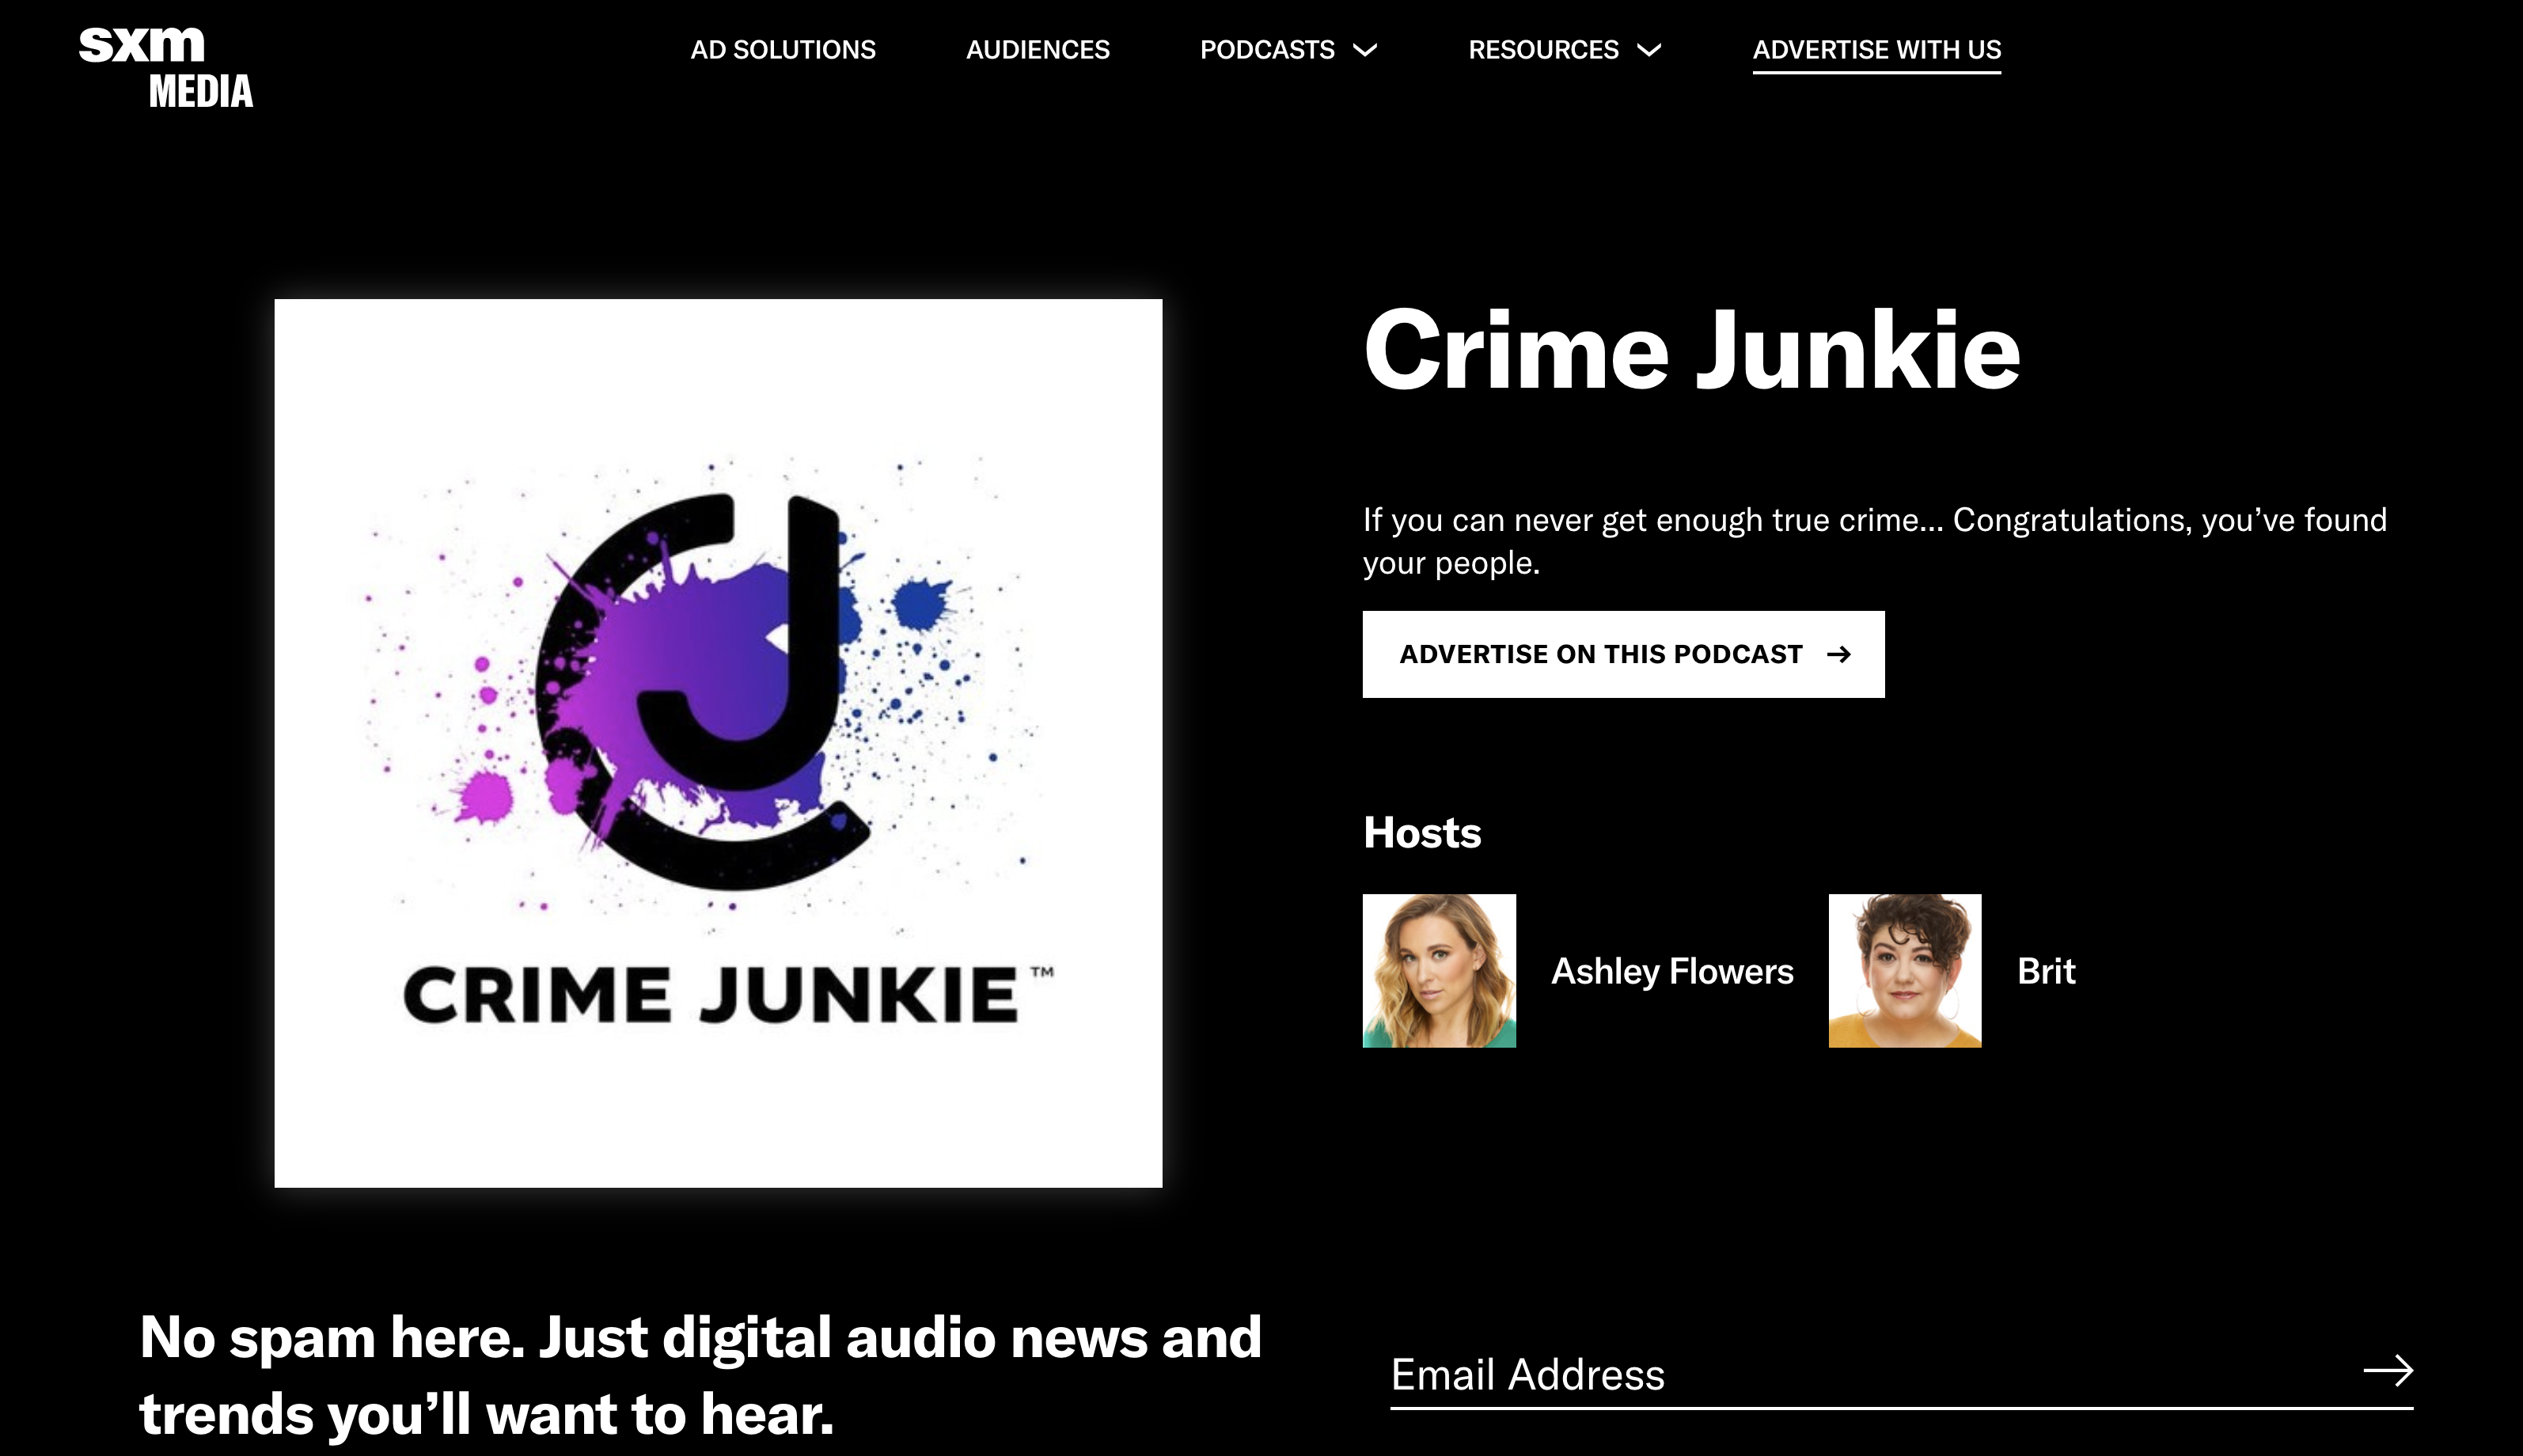 Crime Junkie podcast page with podcast artwork and host images